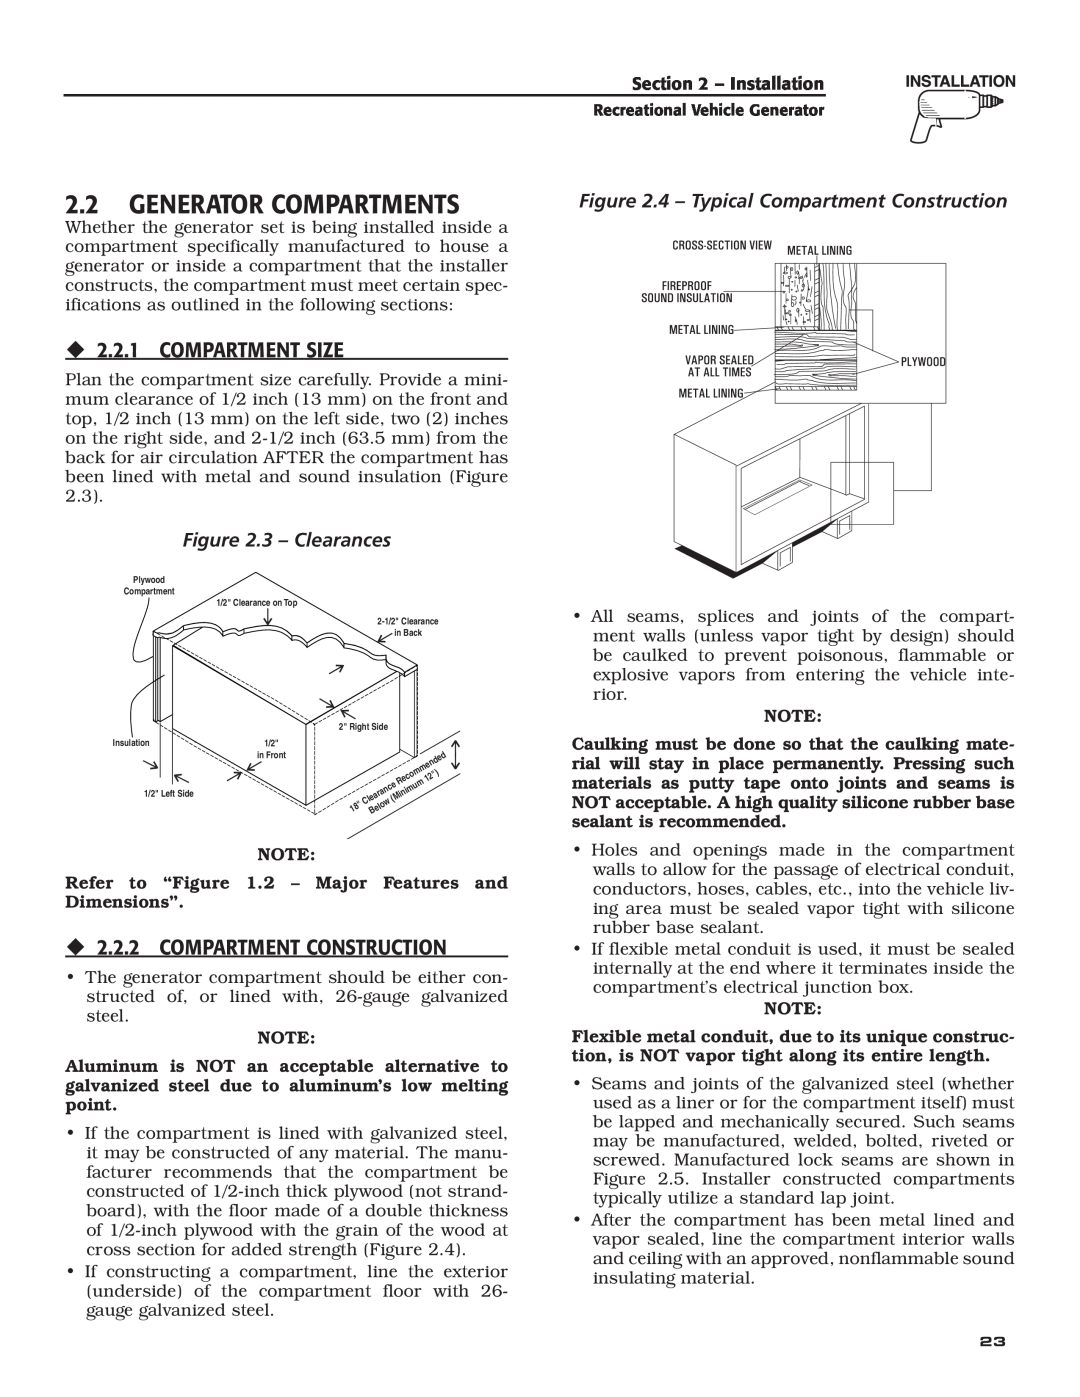 Generac Power Systems 004701-0 2.2GENERATOR COMPARTMENTS, ‹2.2.1 COMPARTMENT SIZE, ‹2.2.2 COMPARTMENT CONSTRUCTION 